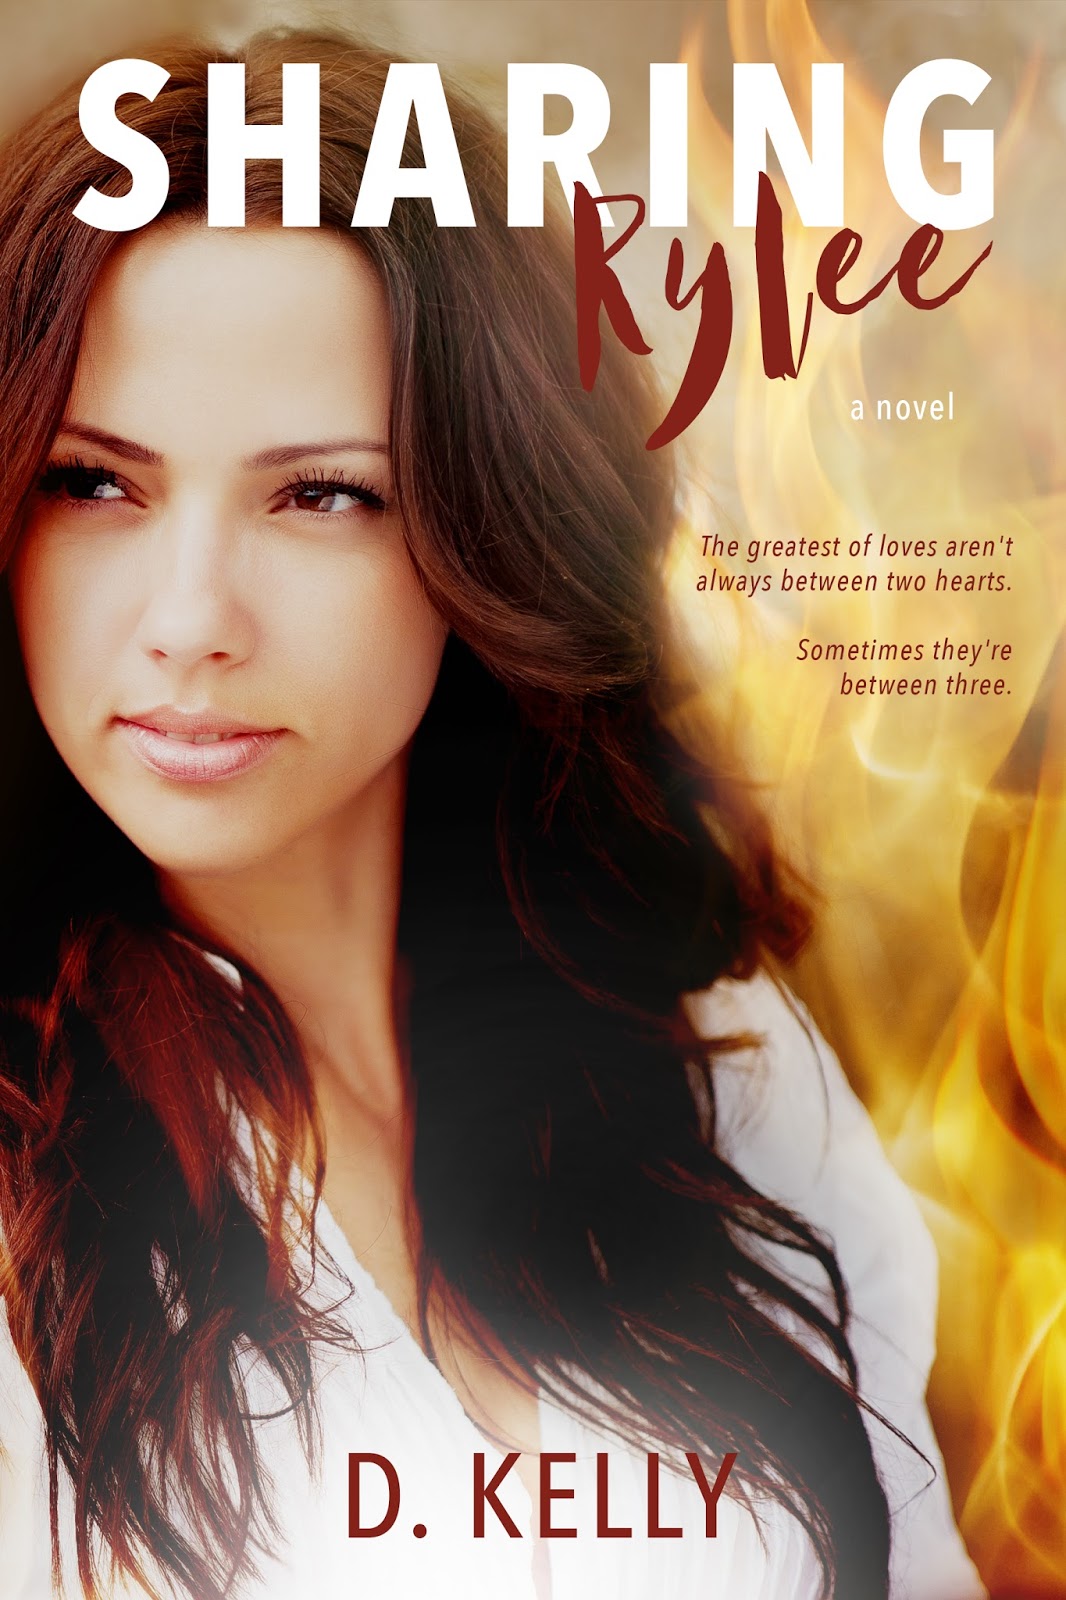 Category Sharing-rylee-by-d-kelly-release-blitz photo